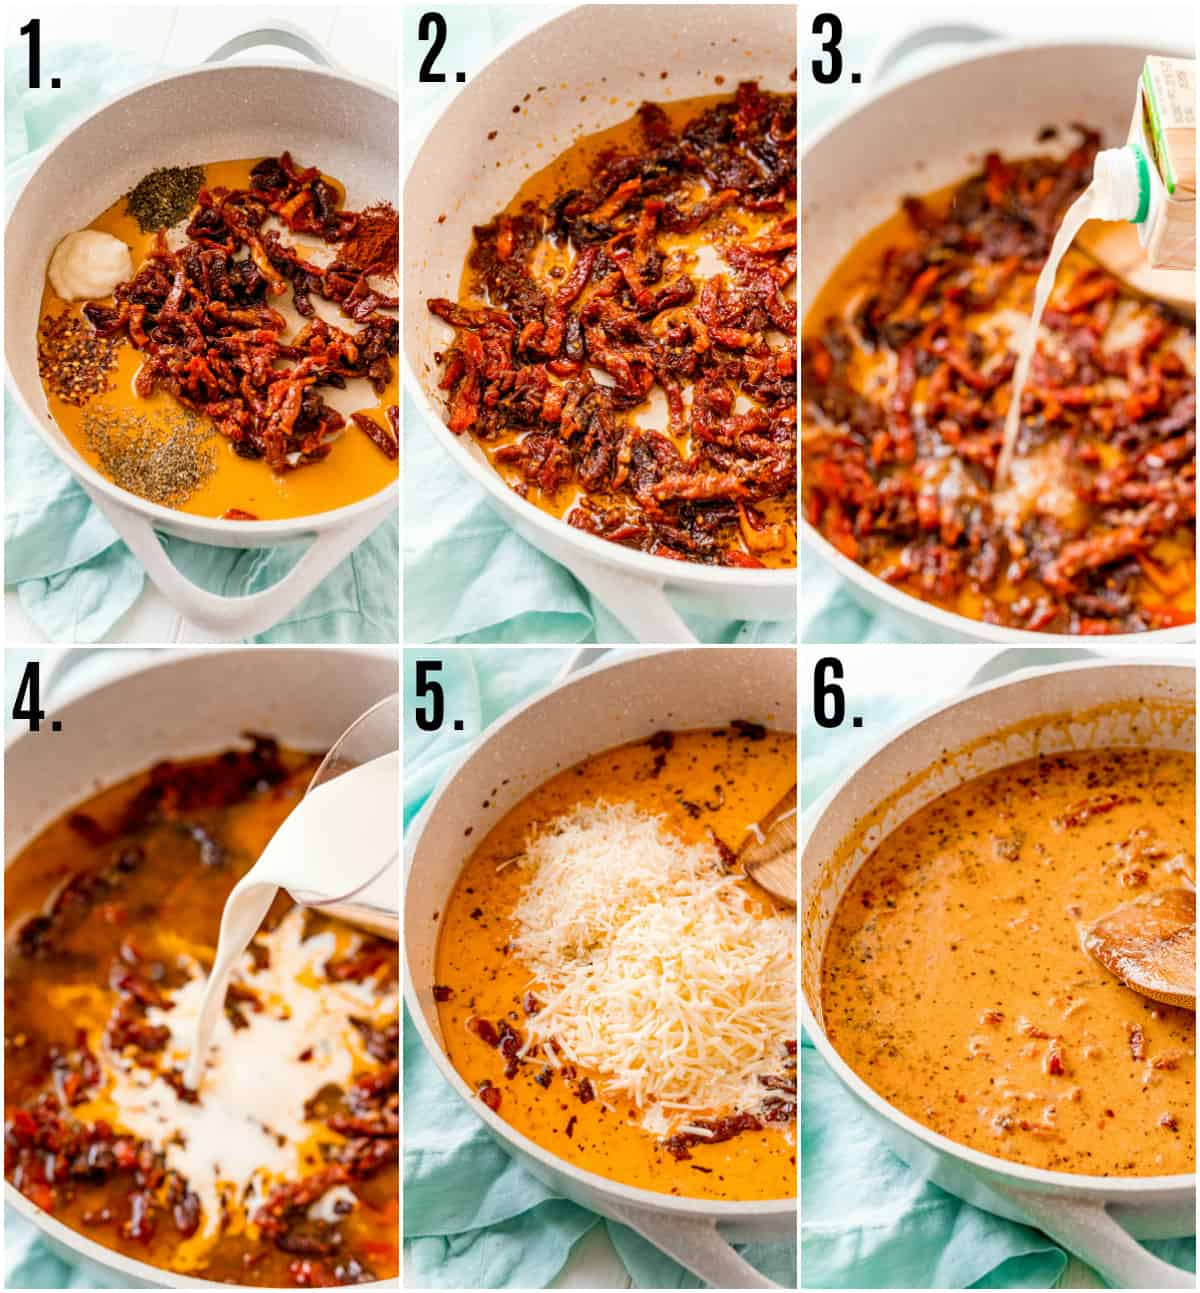 Step by step photos on how to make Sun-Dried Tomato Pasta